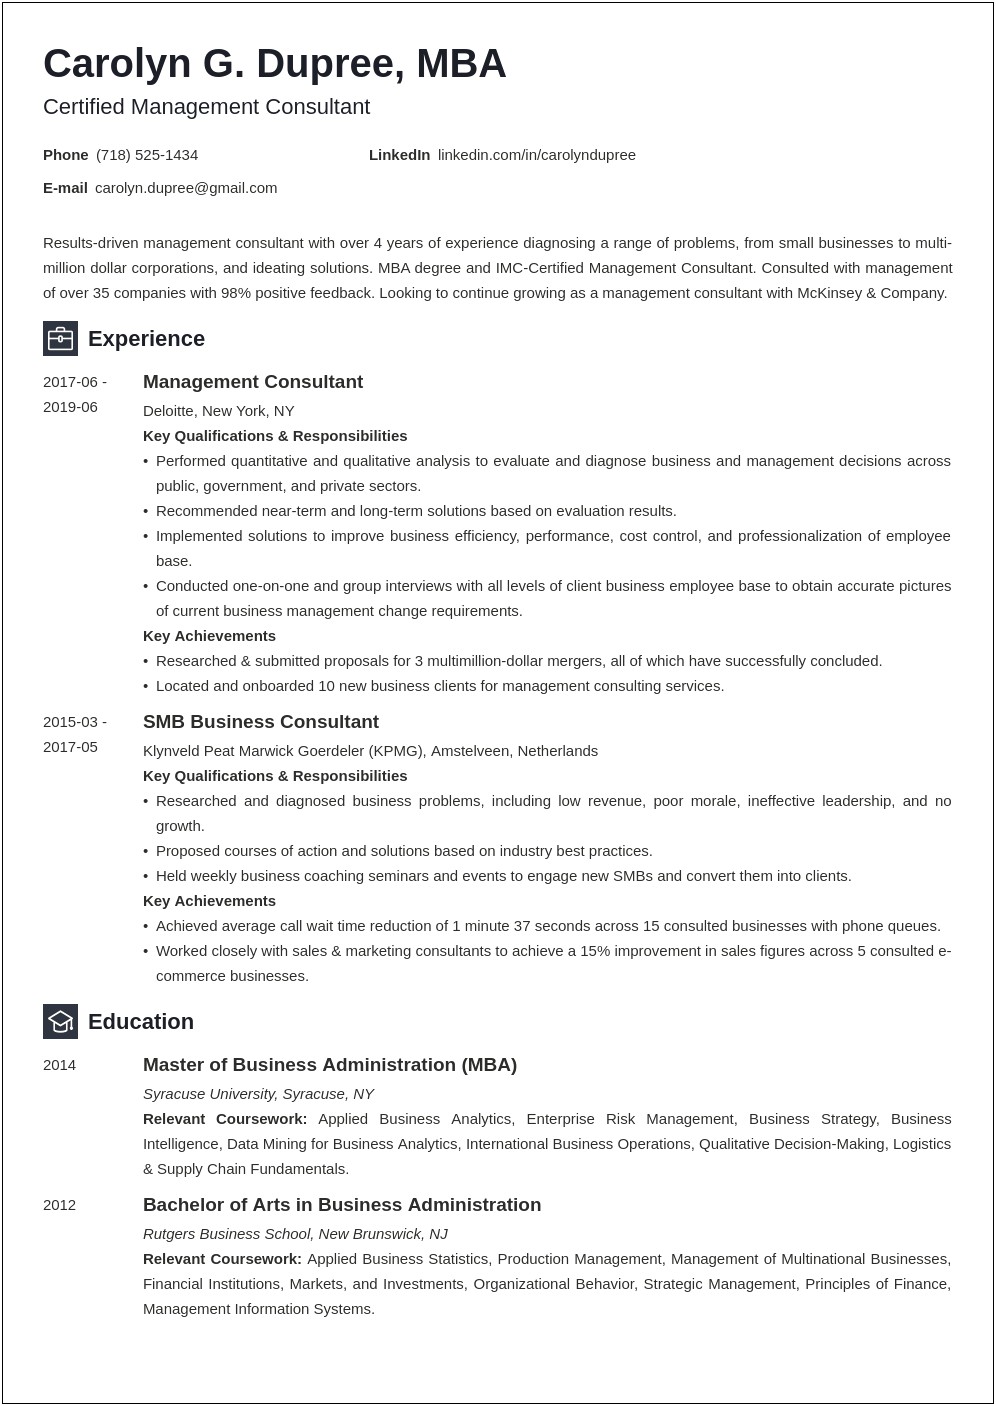 Resume Objective For It Consultant